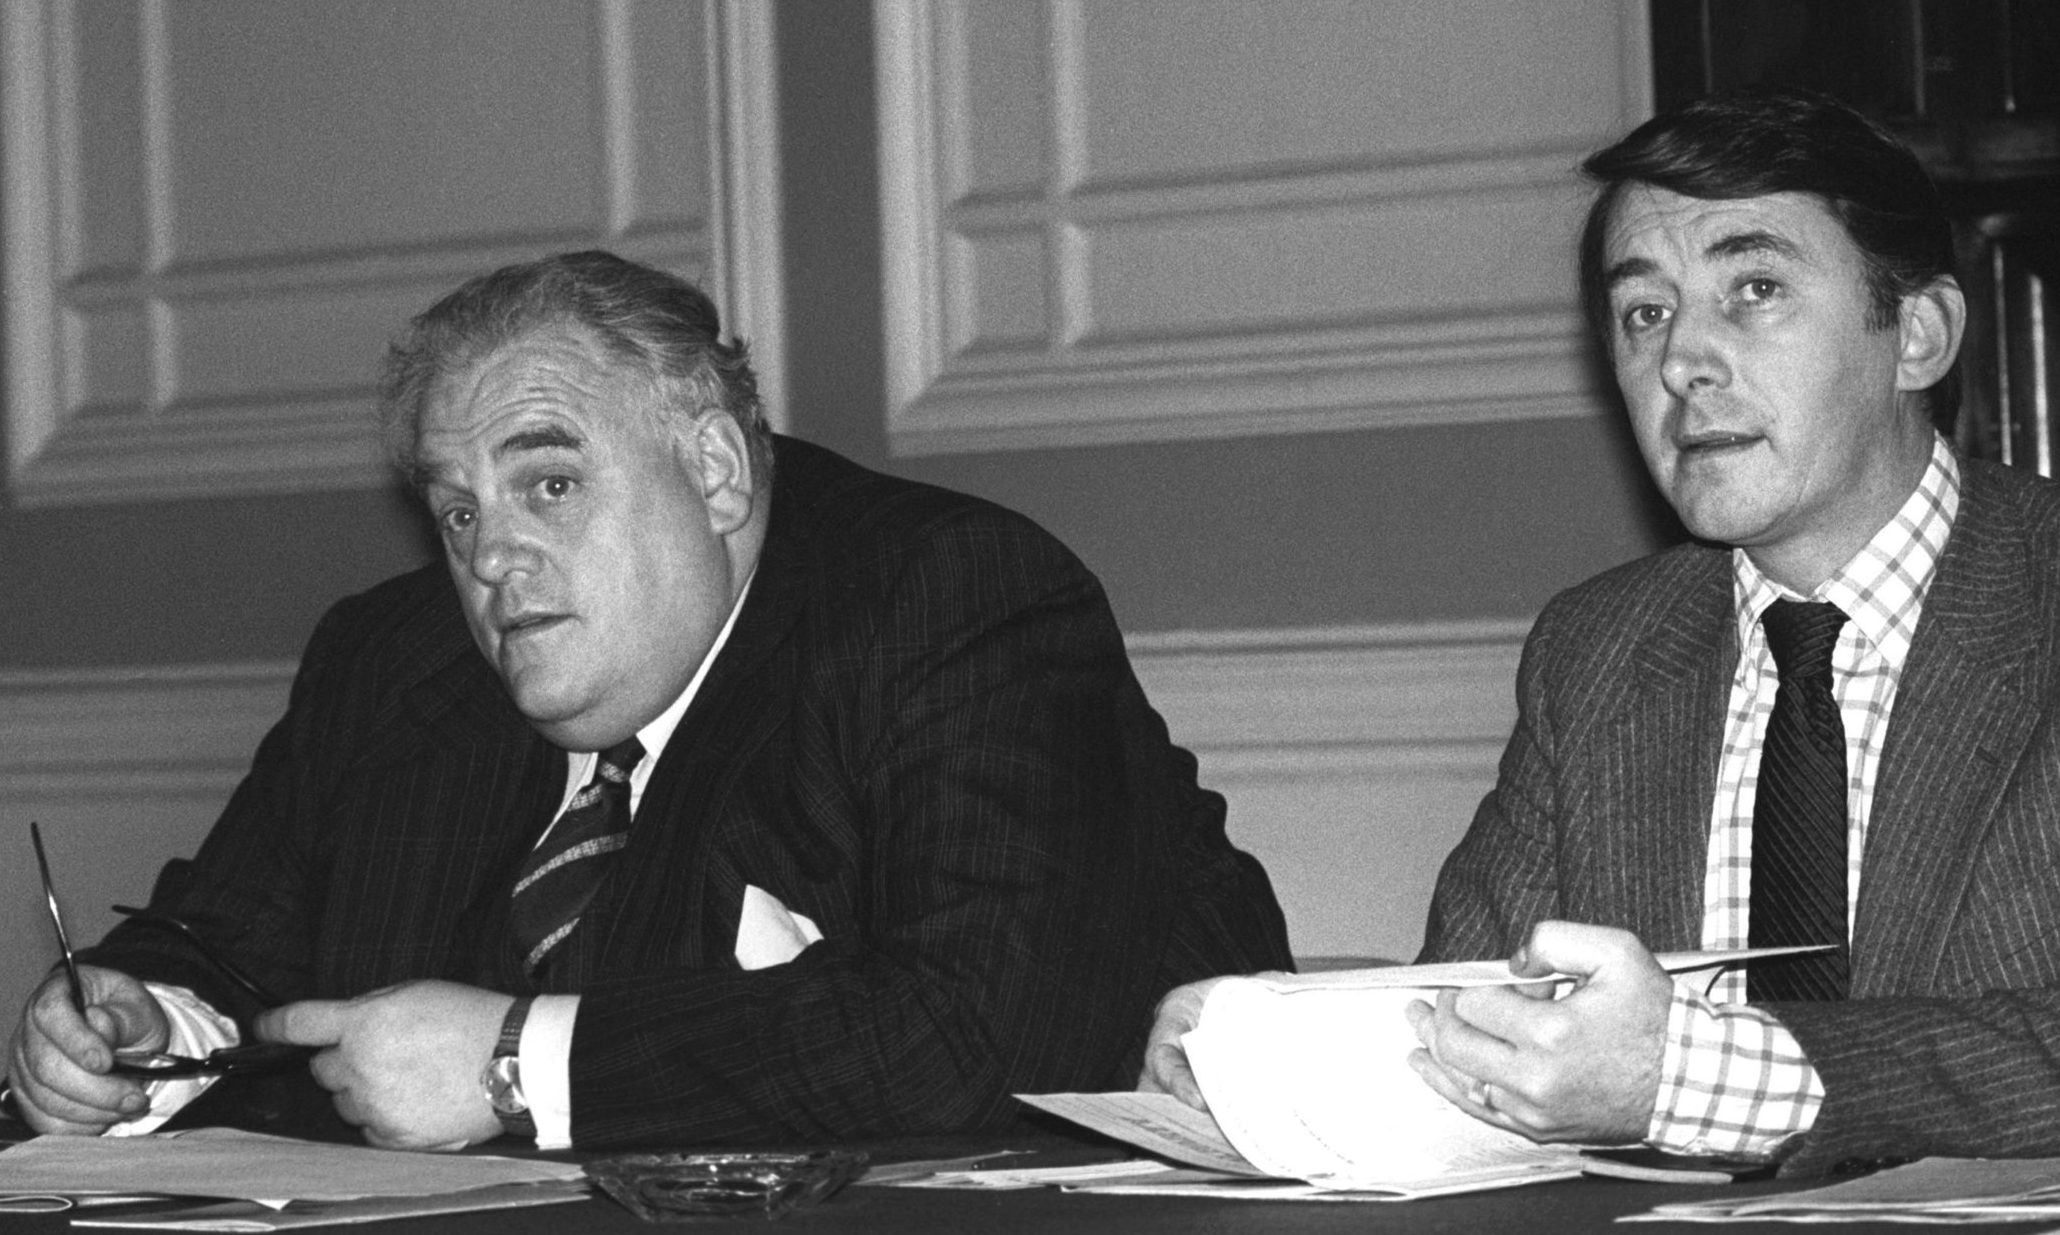 David Steel (right) and Cyril Smith.